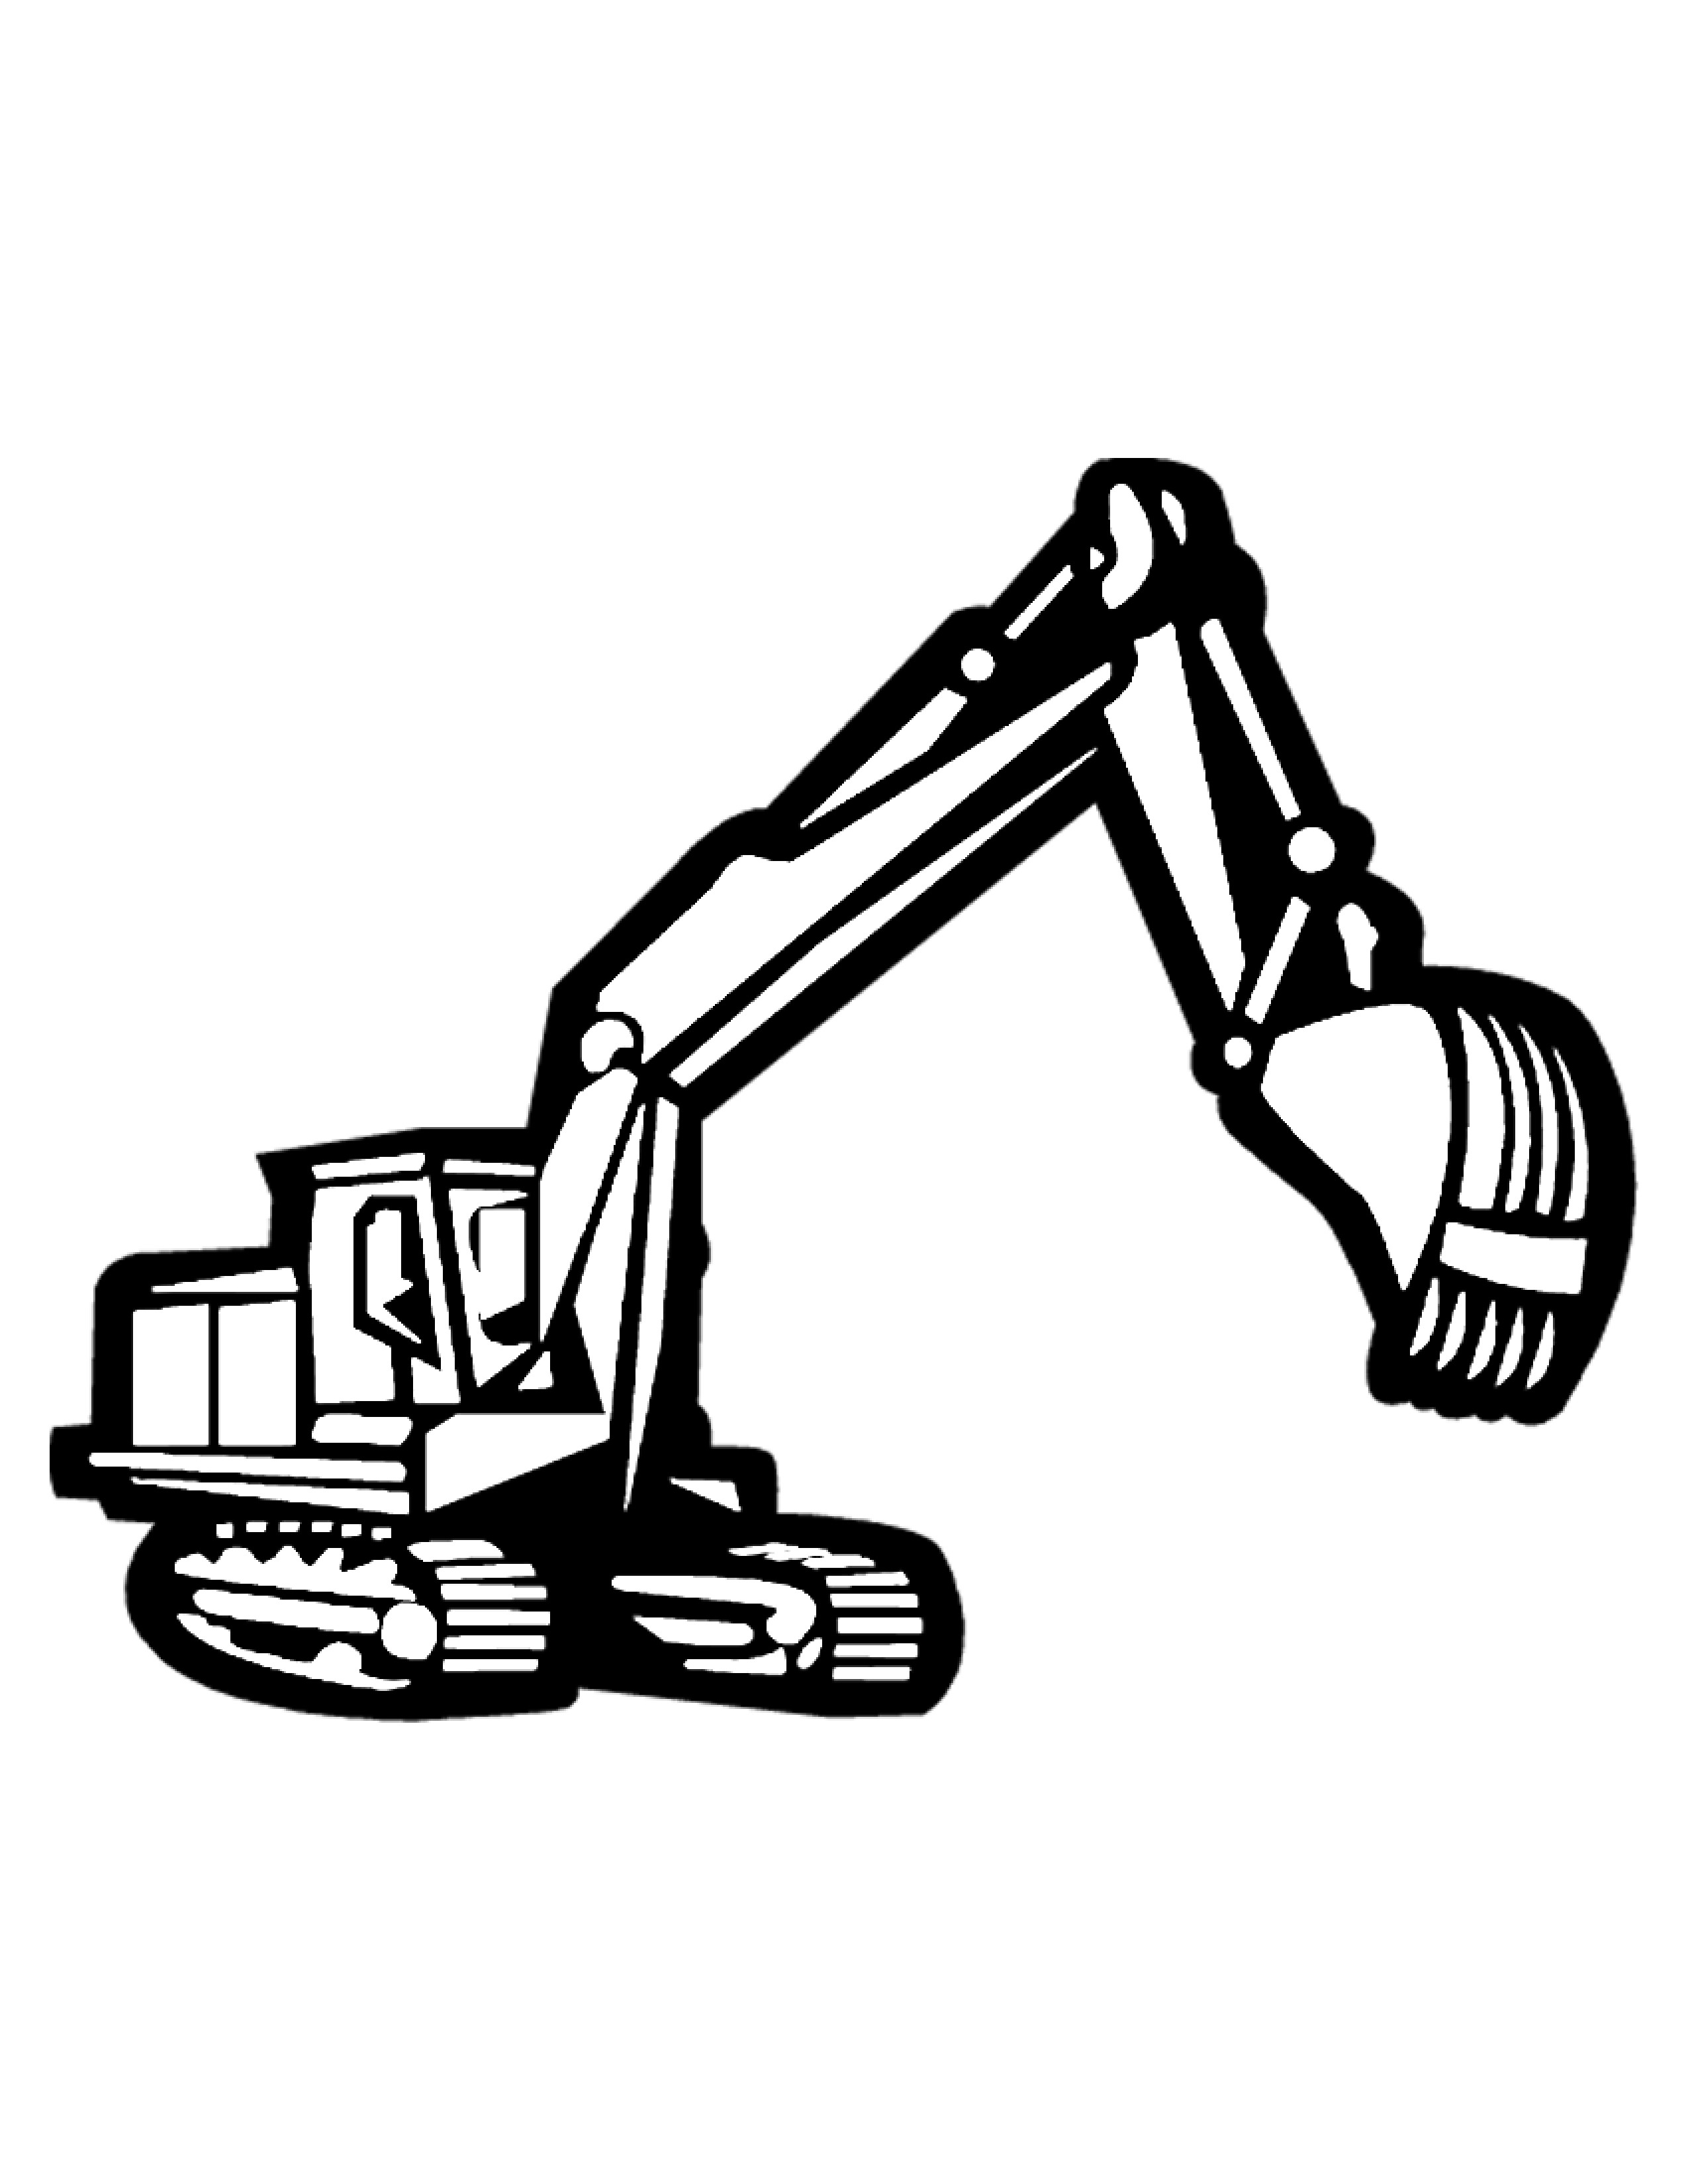 Construction Equipment Coloring Page 